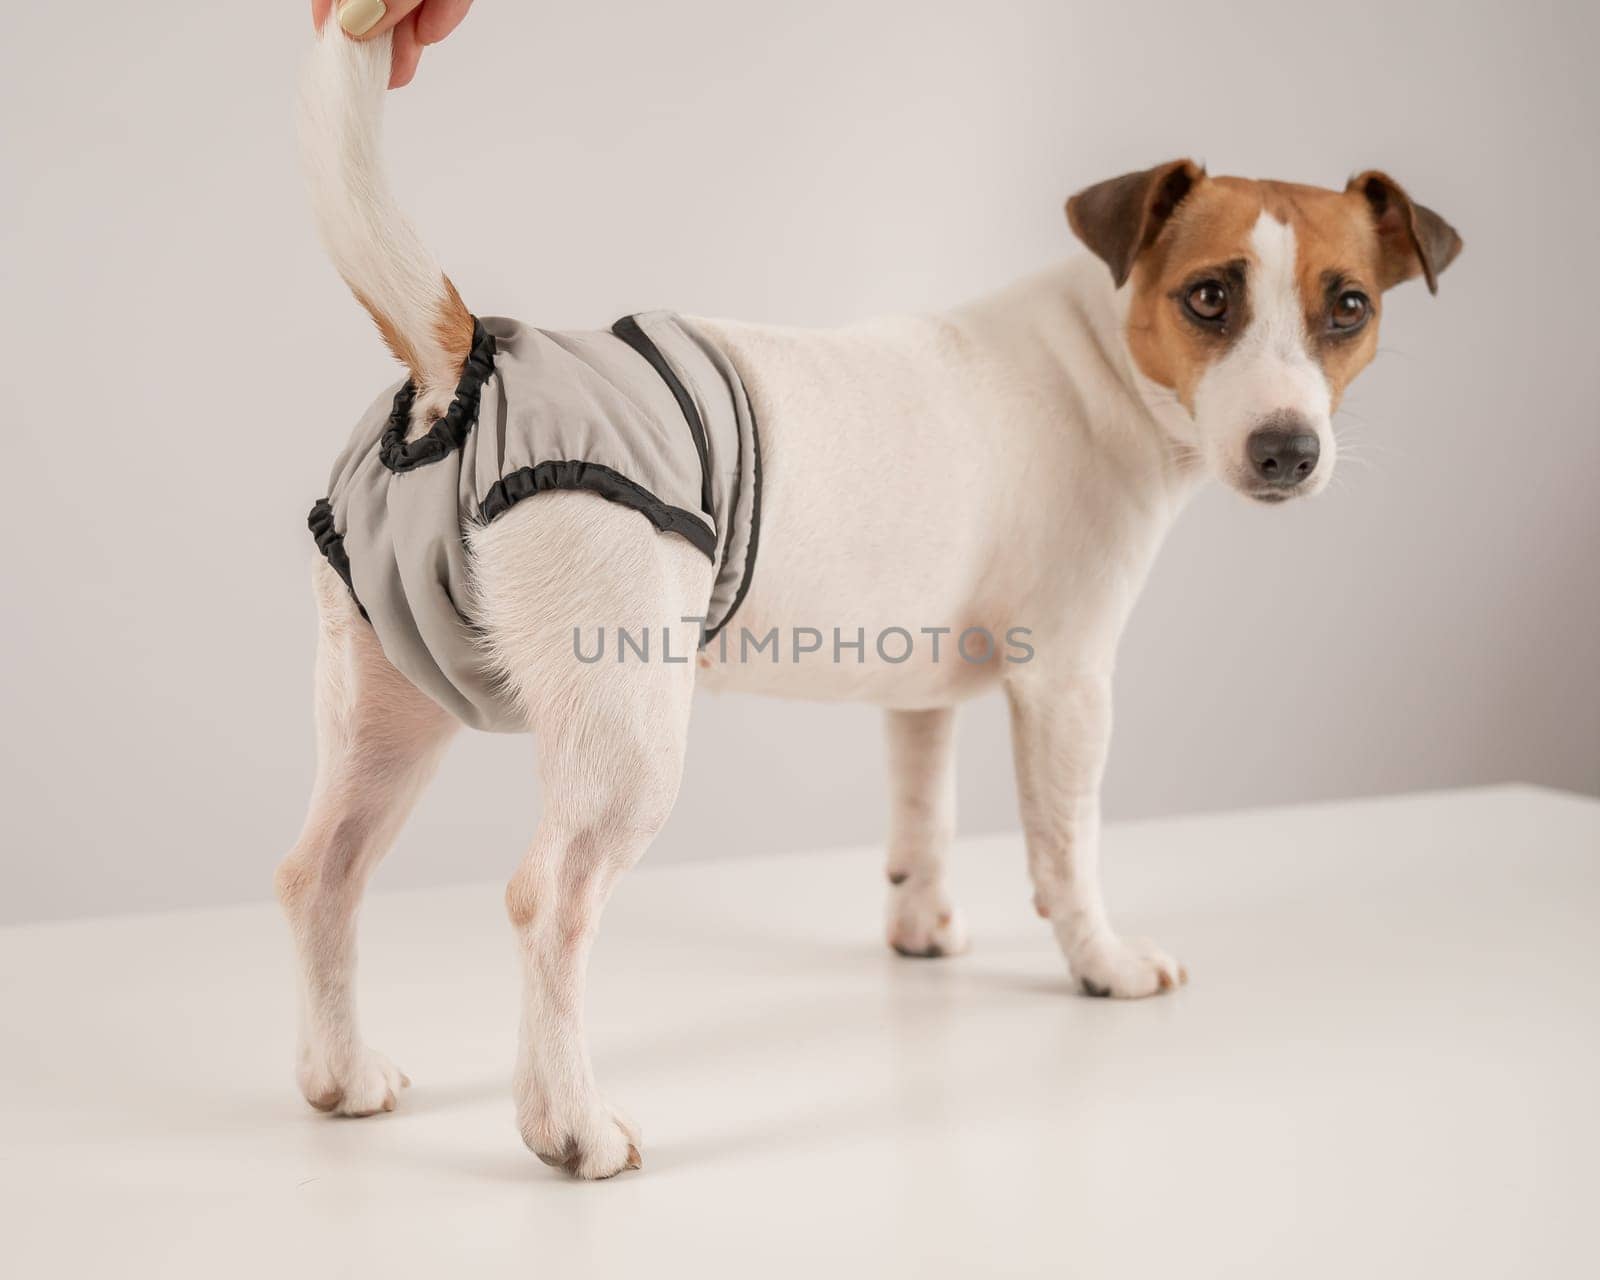 Cute Jack Russell Terrier dog wearing menstrual panties on a white background. Reusable diaper